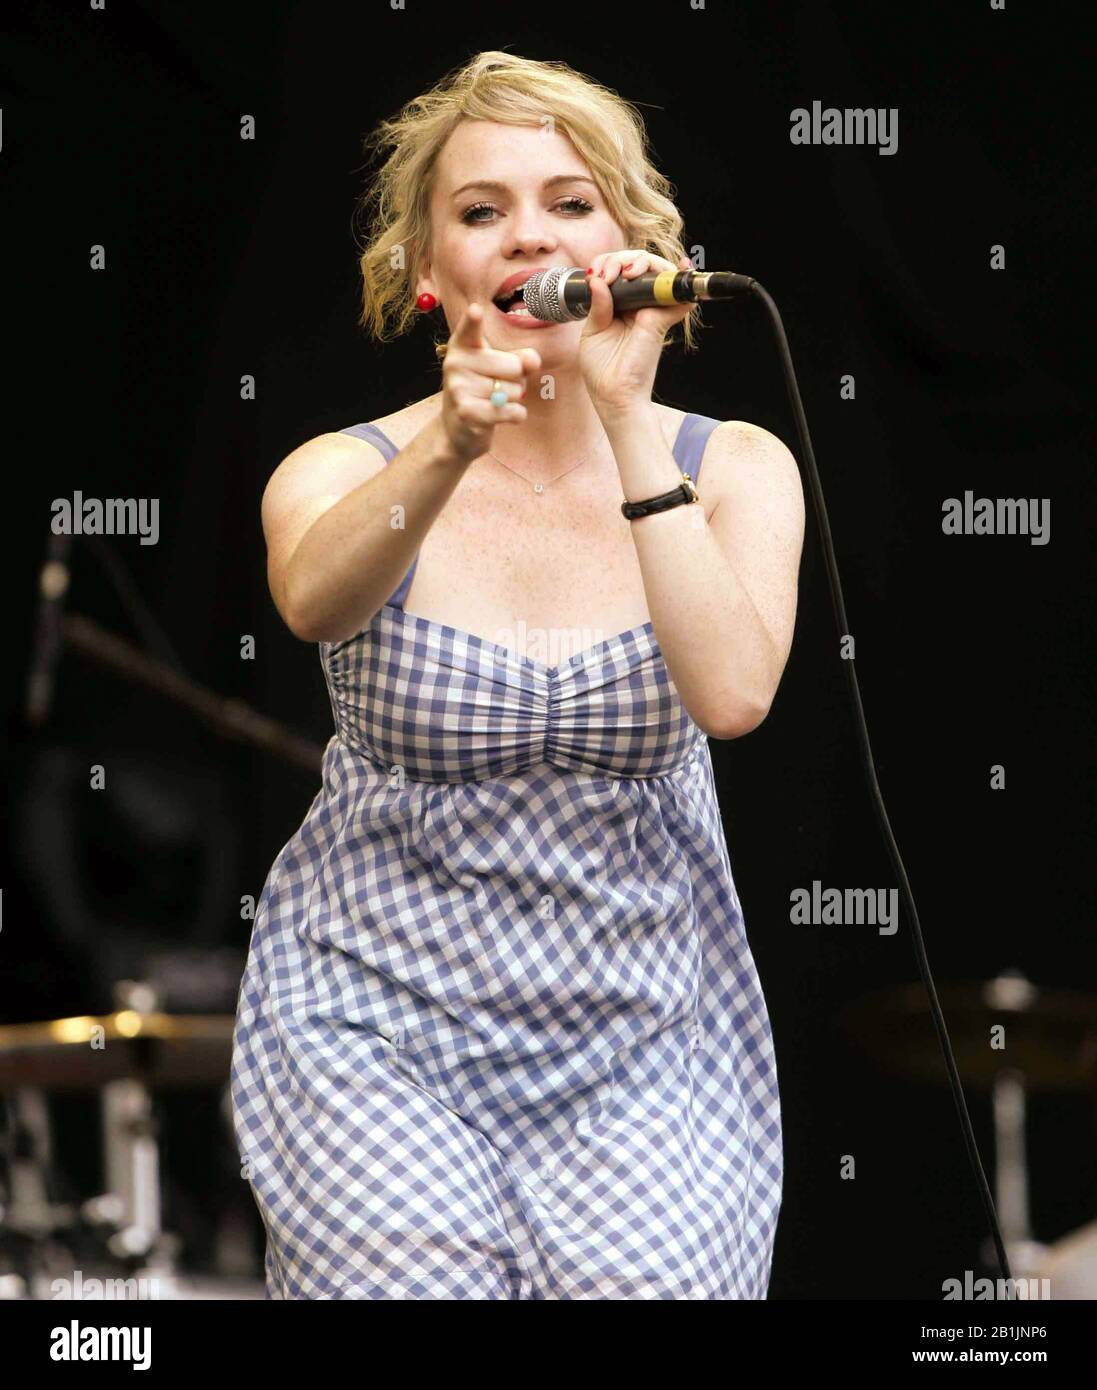 mikrofon Grusom utilstrækkelig STOCK Picture dated August 2008 shows Duffy performing at the V Festival in  Chelmsford,Essex. Grammy award-winning singer Duffy has revealed she was  drugged and raped after being held captive by an attacker.